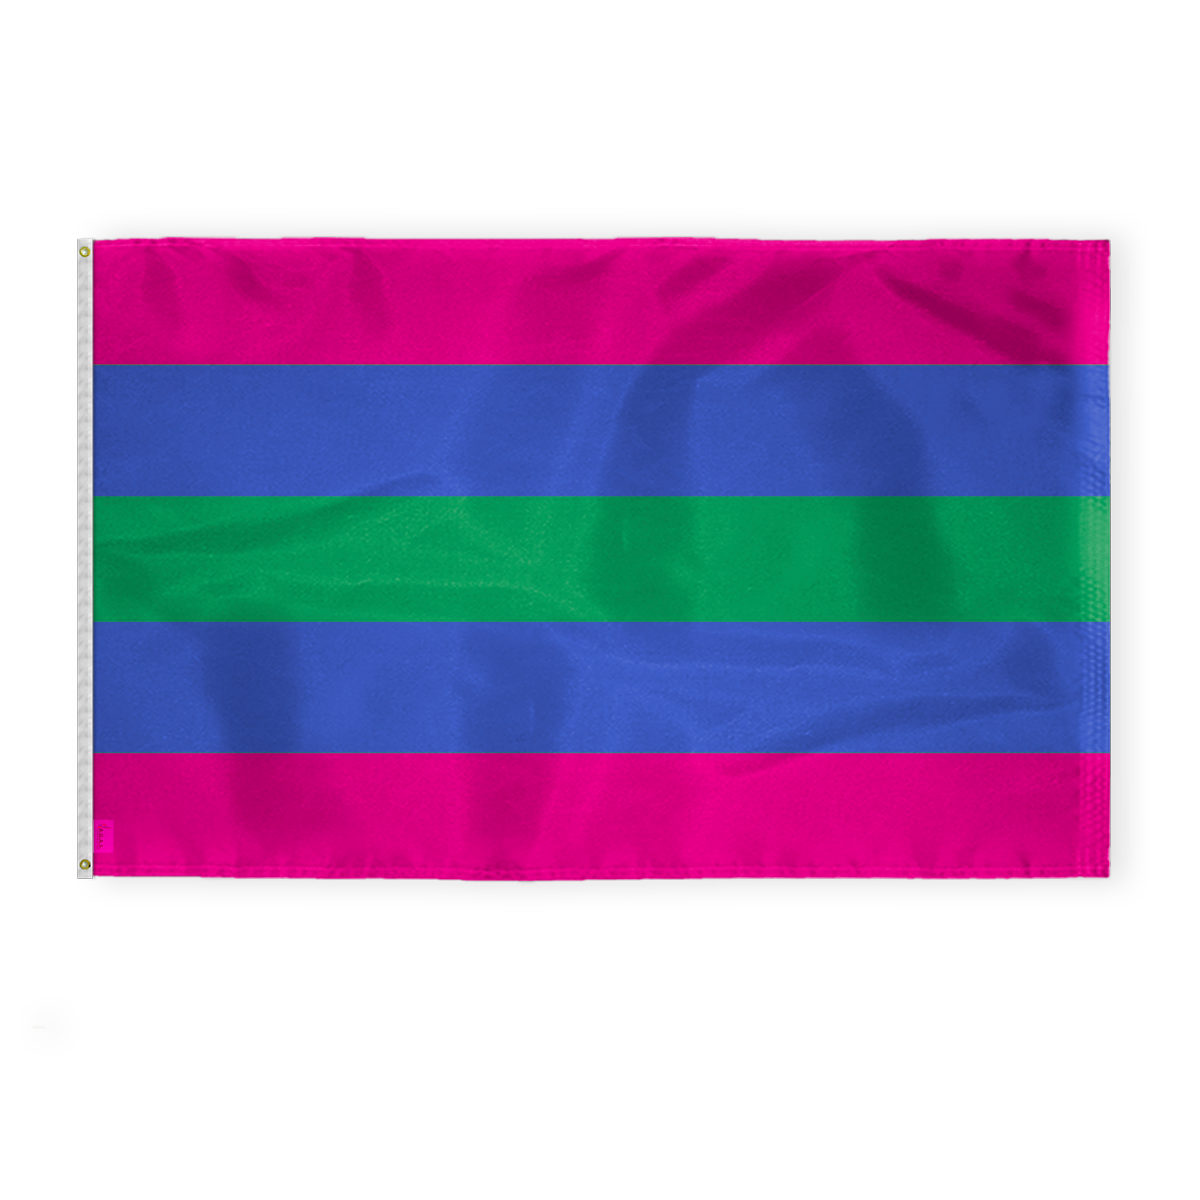 AGAS Trigender Pride Flag 4x6 Ft - Double Sided Printed 200D Nylon